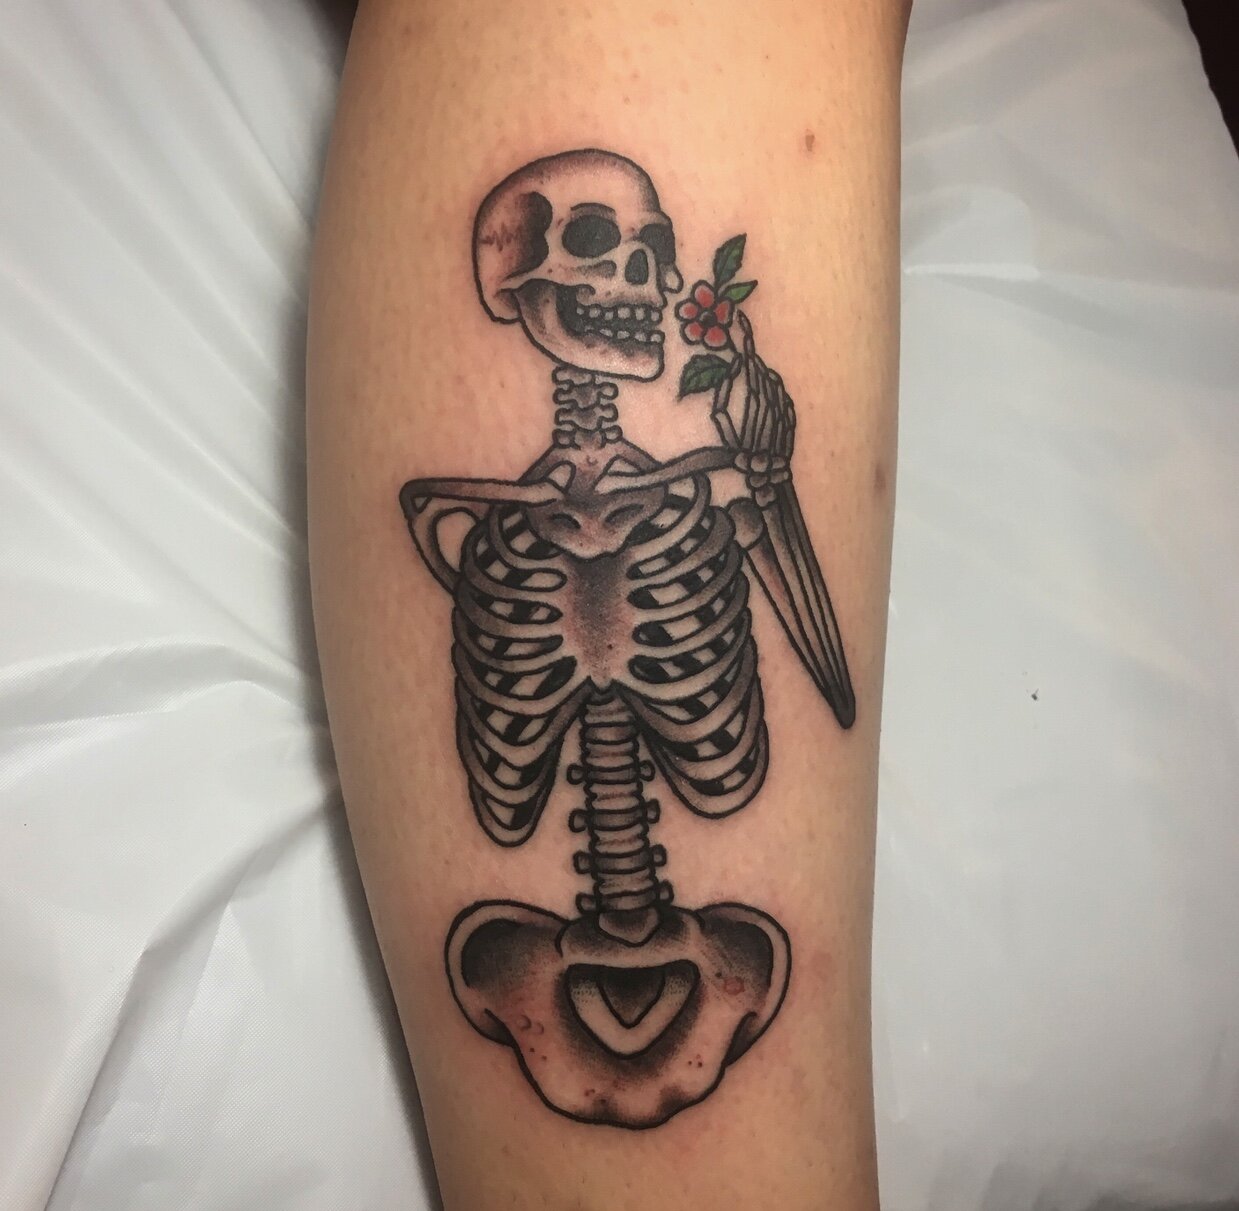 Skelton holding flower tattoo by Andrew Patch at Southern Star Tattoo in Atlanta, Georgia.